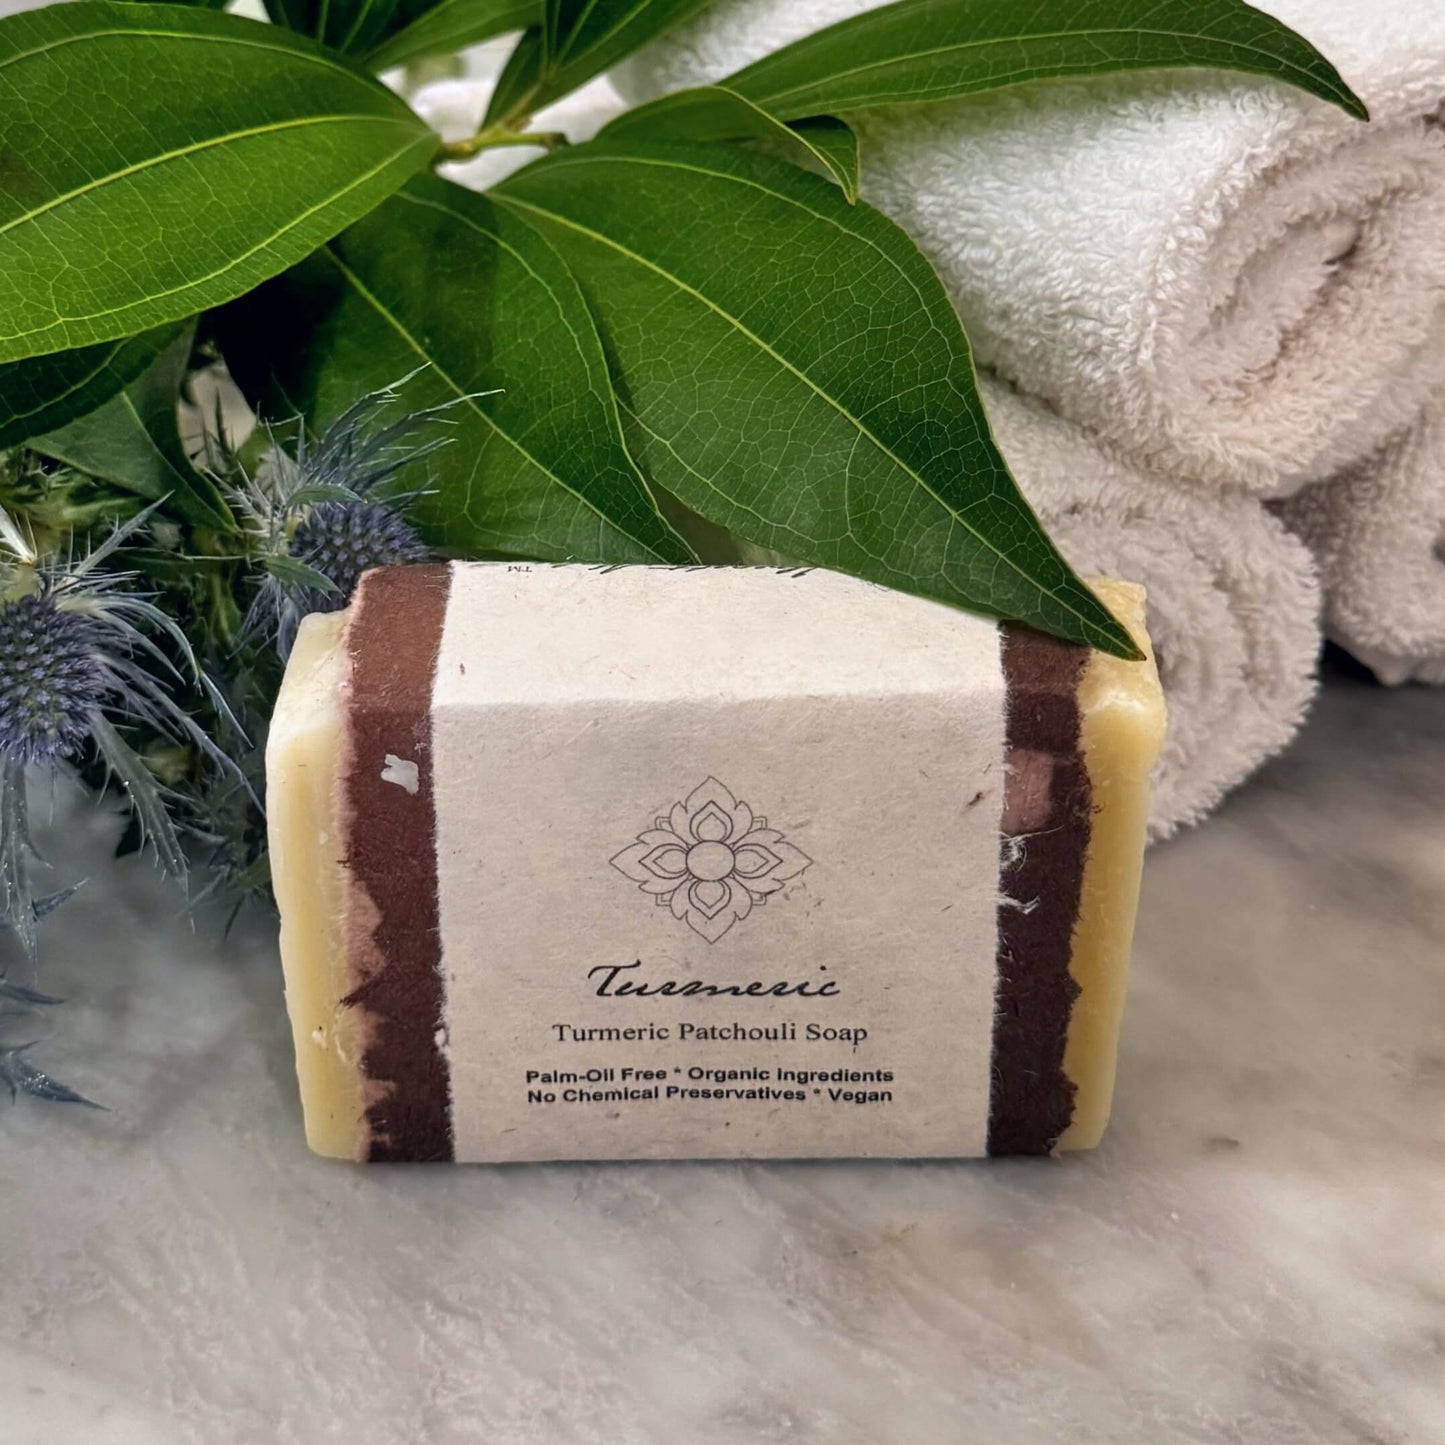 A bar of Turmeric Patchouli Soap on a bathroom counter with towels and foliage around it